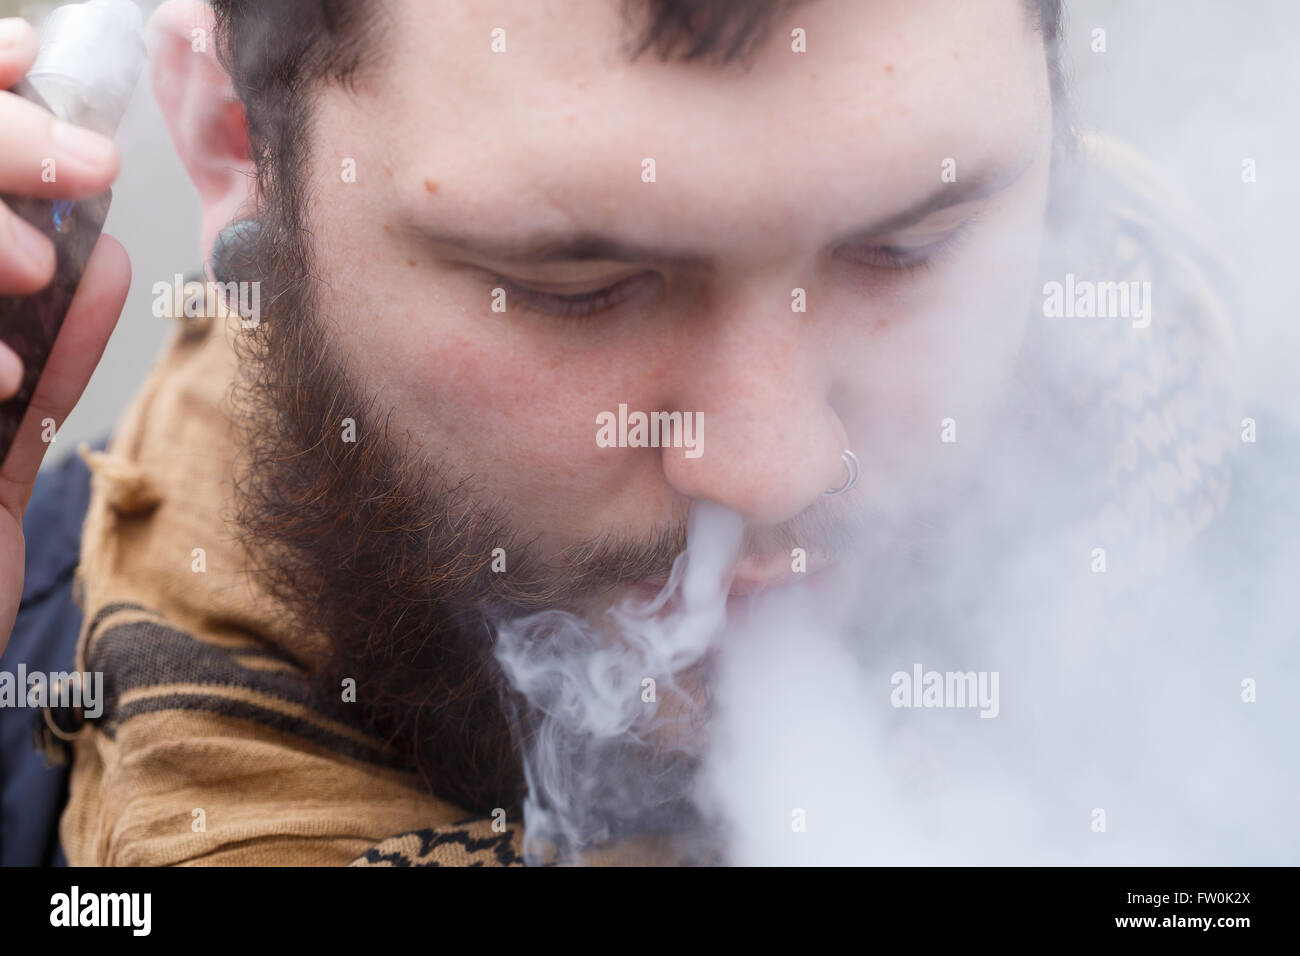 Urban lifestyle portrait of a man vaping in an urban environment with a custom vape mod device. Stock Photo